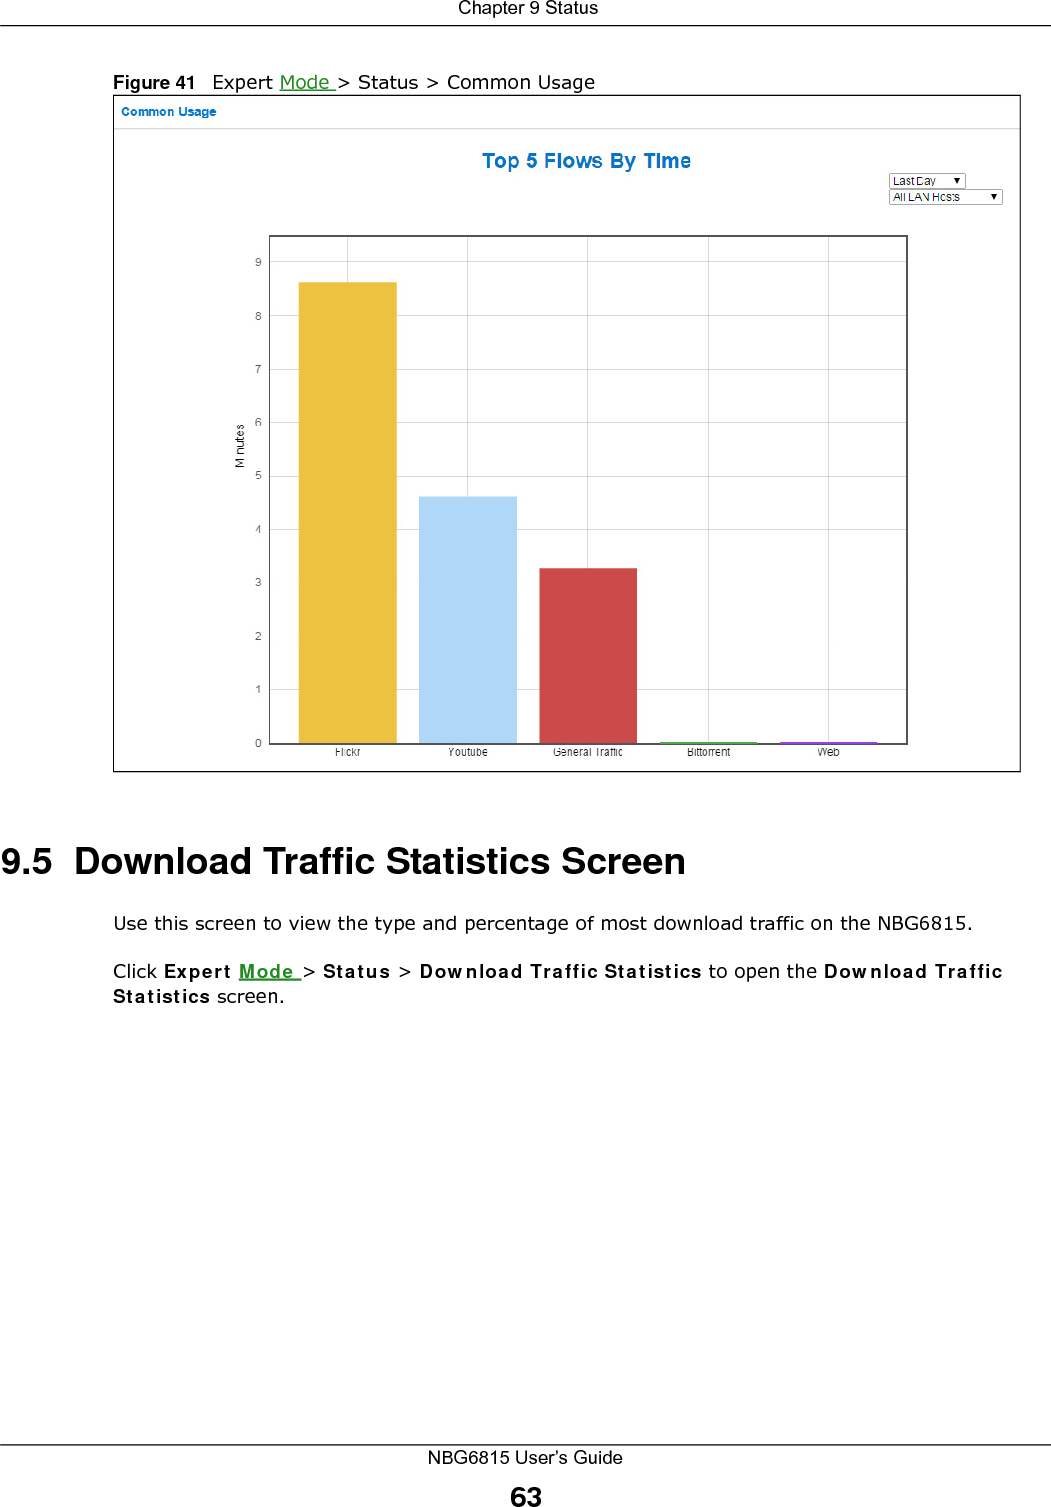  Chapter 9 StatusNBG6815 User’s Guide63Figure 41   Expert Mode &gt; Status &gt; Common Usage9.5  Download Traffic Statistics ScreenUse this screen to view the type and percentage of most download traffic on the NBG6815.Click Expert Mode &gt; Status &gt; Download Traffic Statistics to open the Download Traffic Statistics screen.